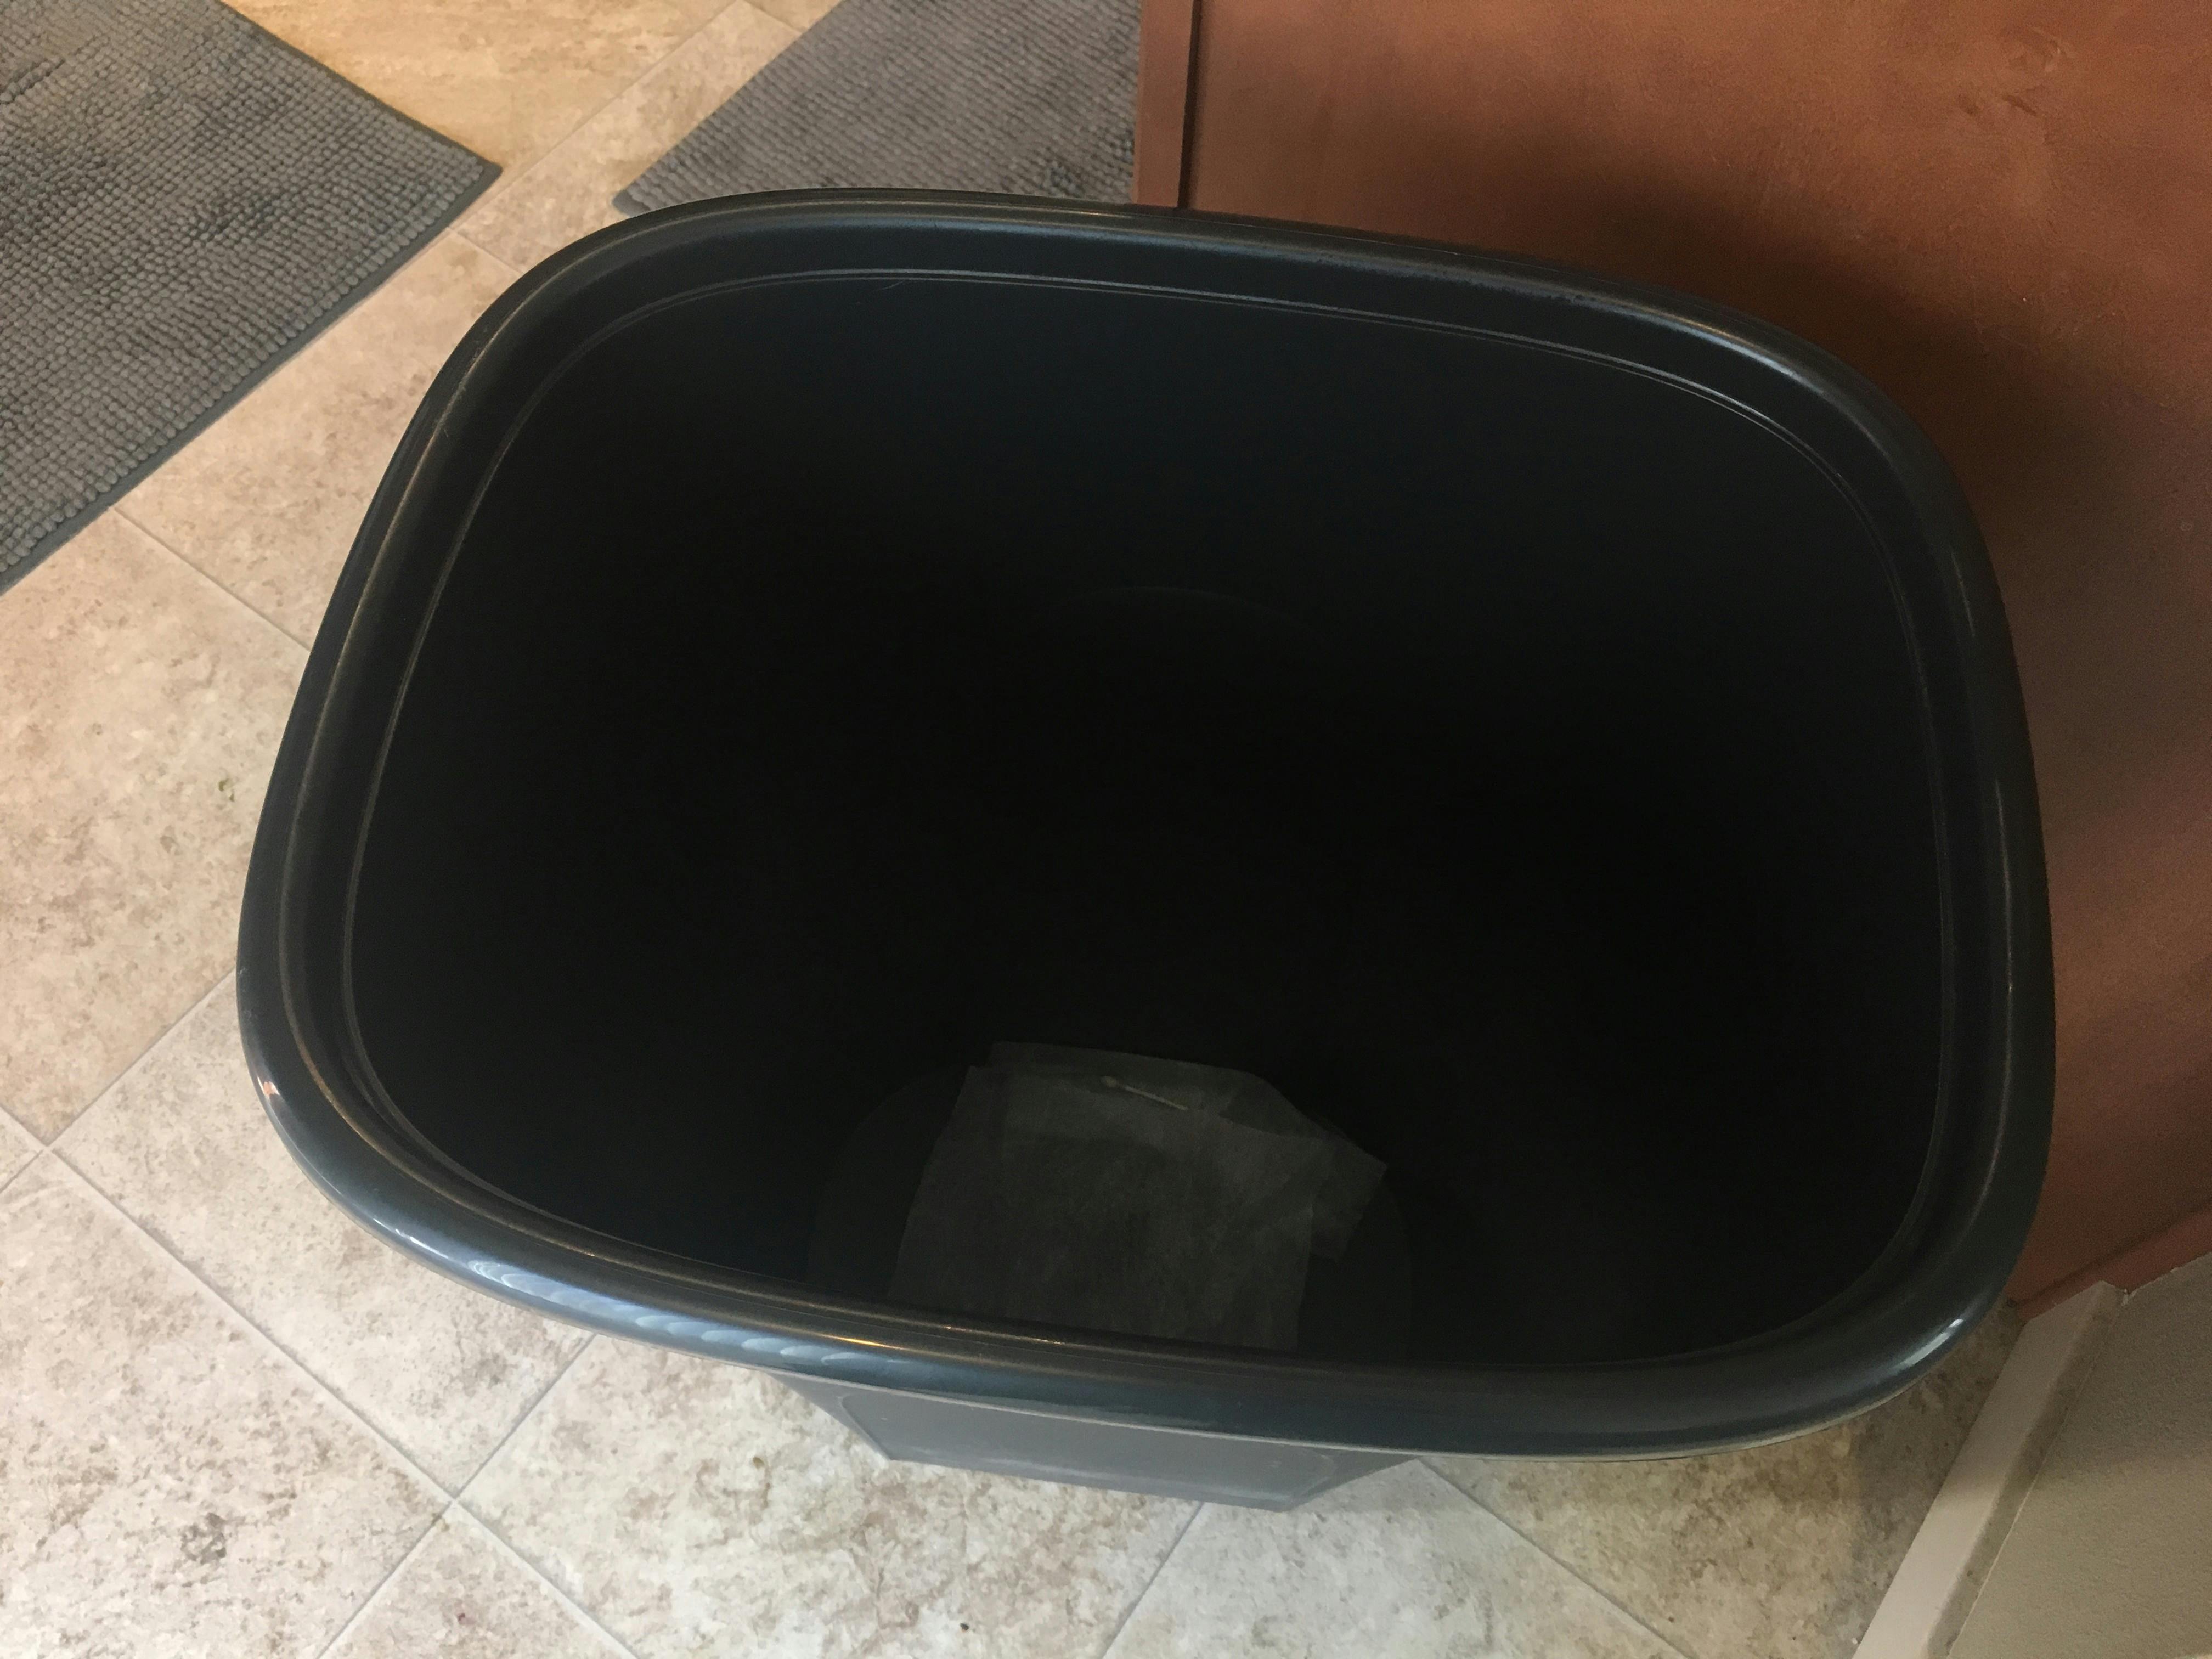 Line your garbage can to keep it smelling fresh.